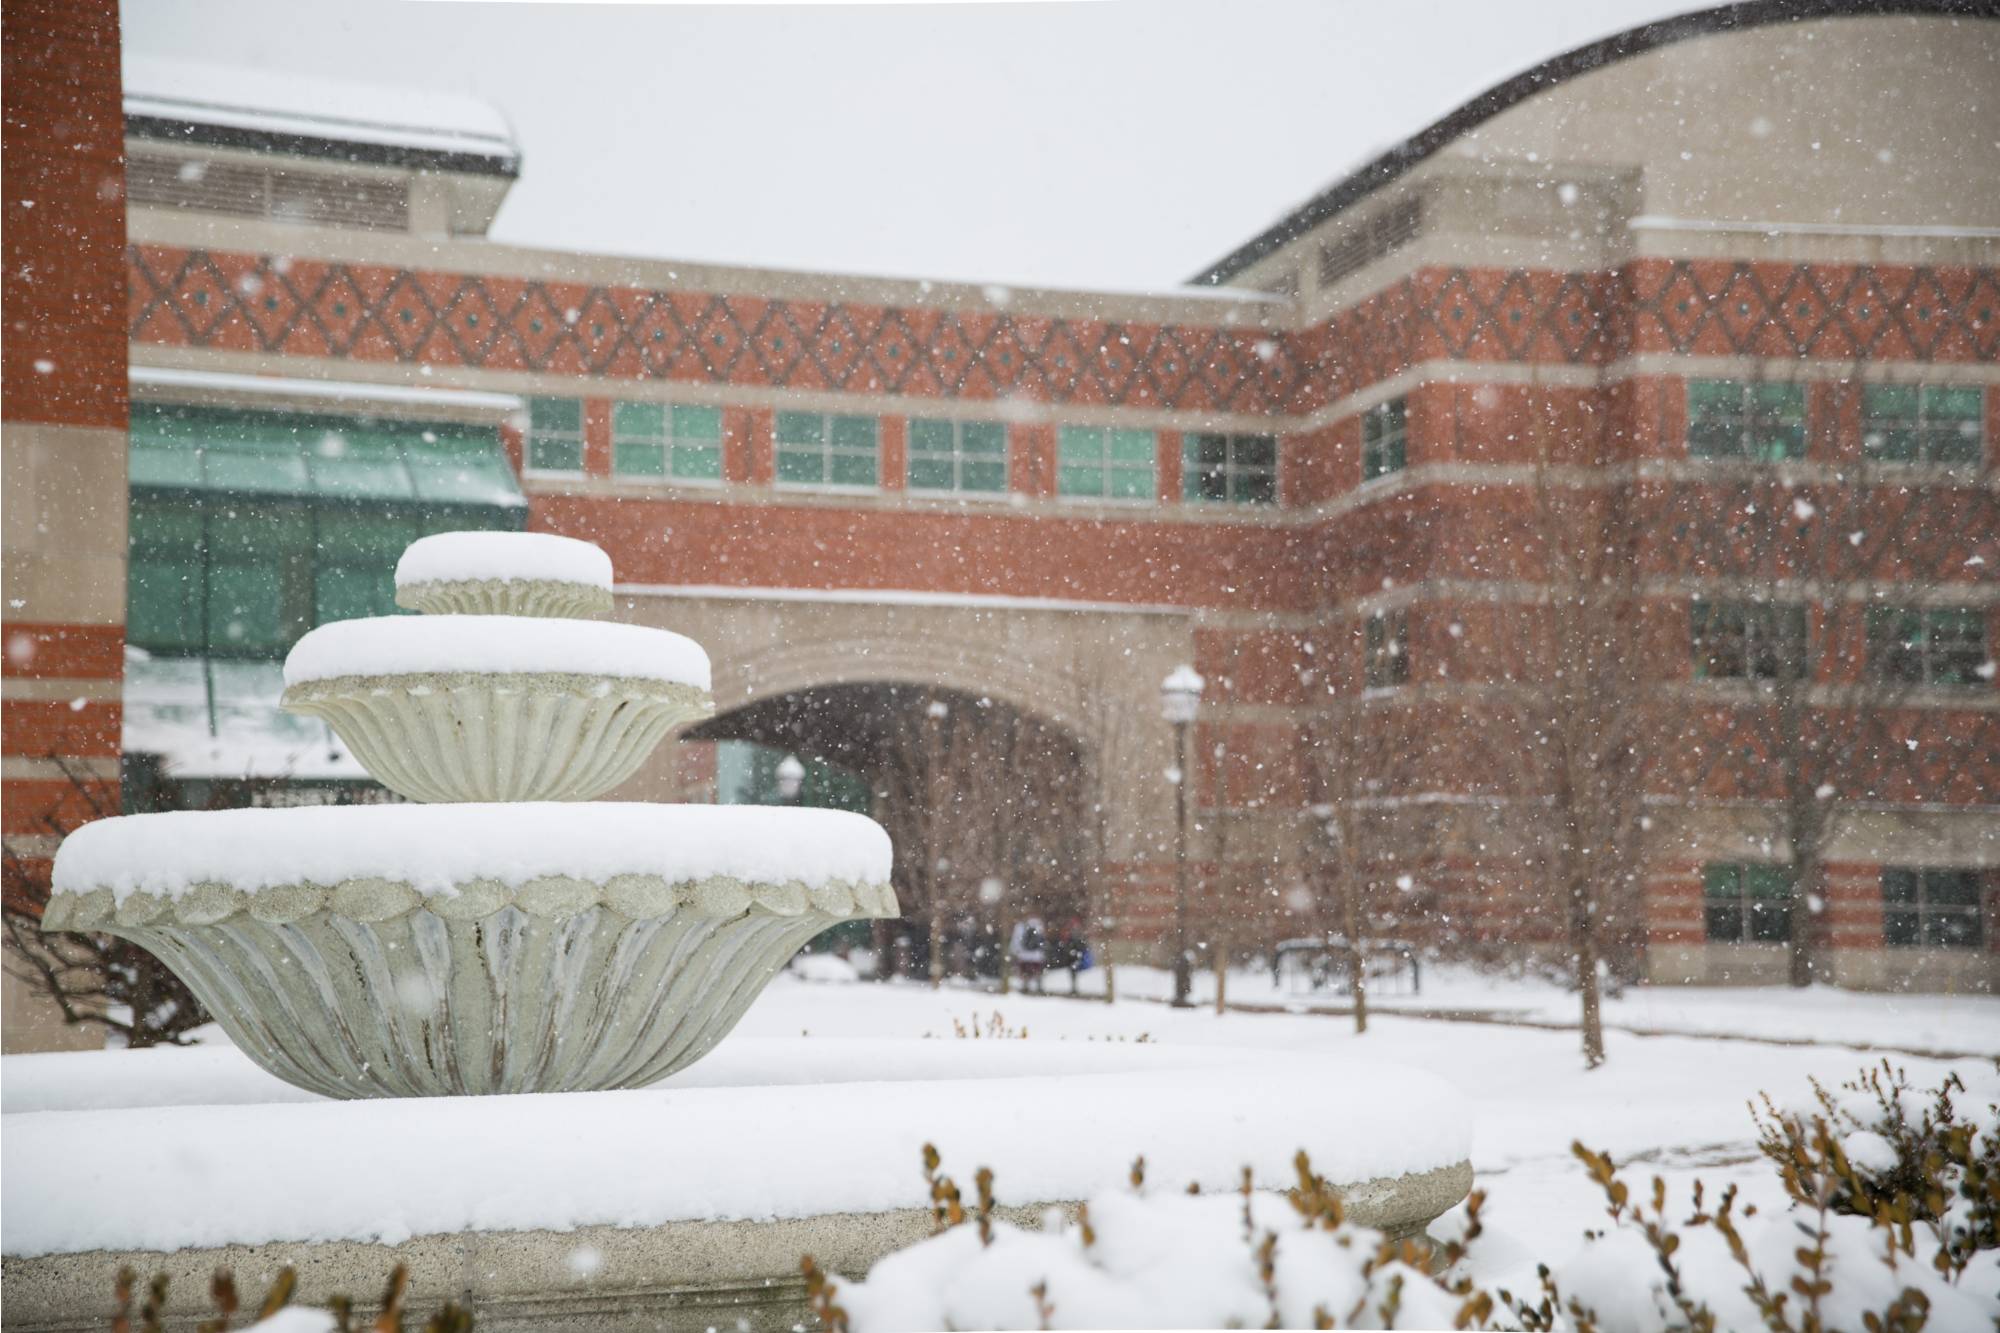 Henry Hall Fountain in winter